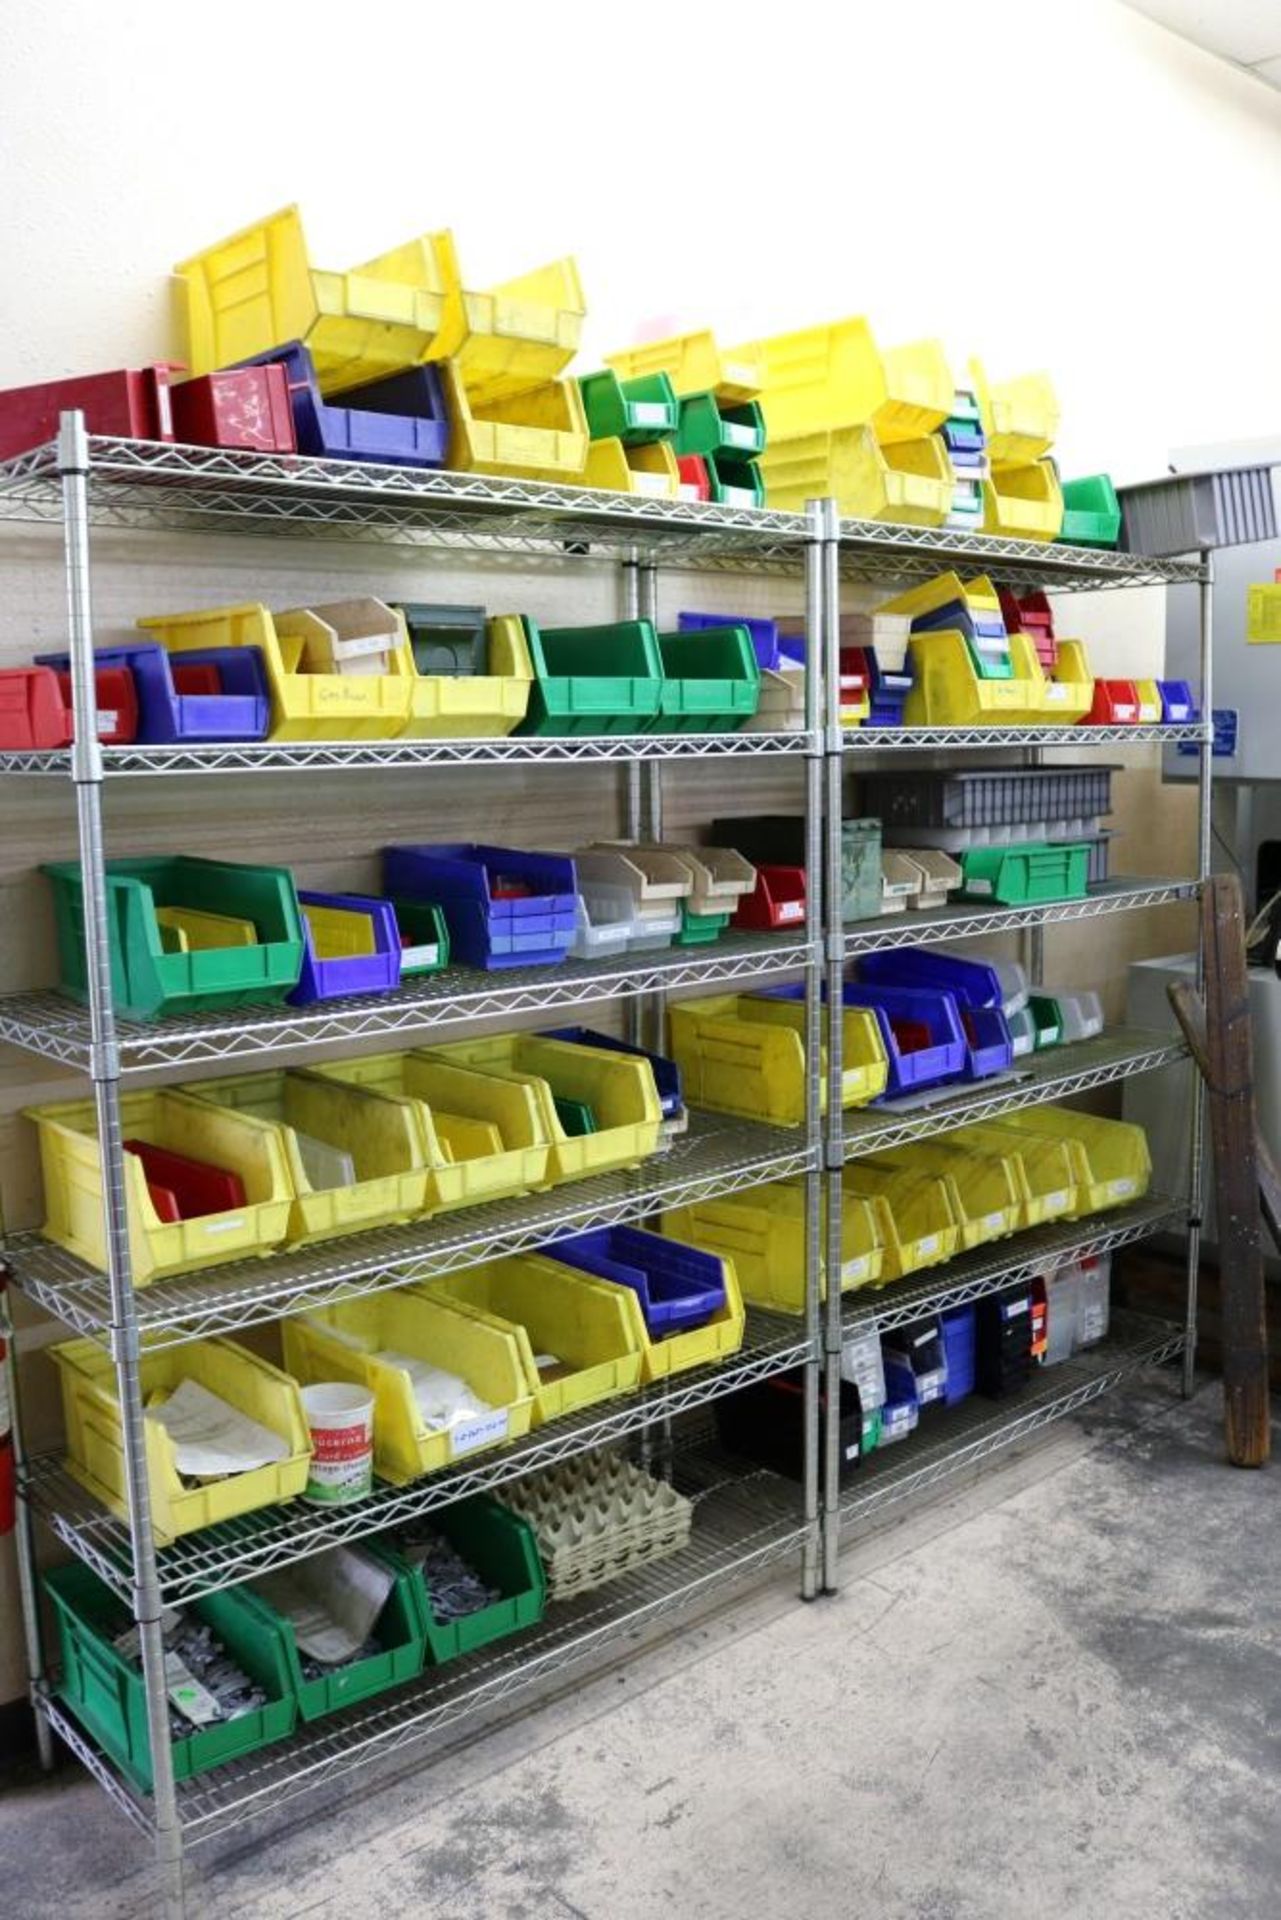 (2) 6 Tier Wire Rack Shelves with Various Size Plastic Sorting Bins, 47" x 17 1/2" x 72" (Parts on